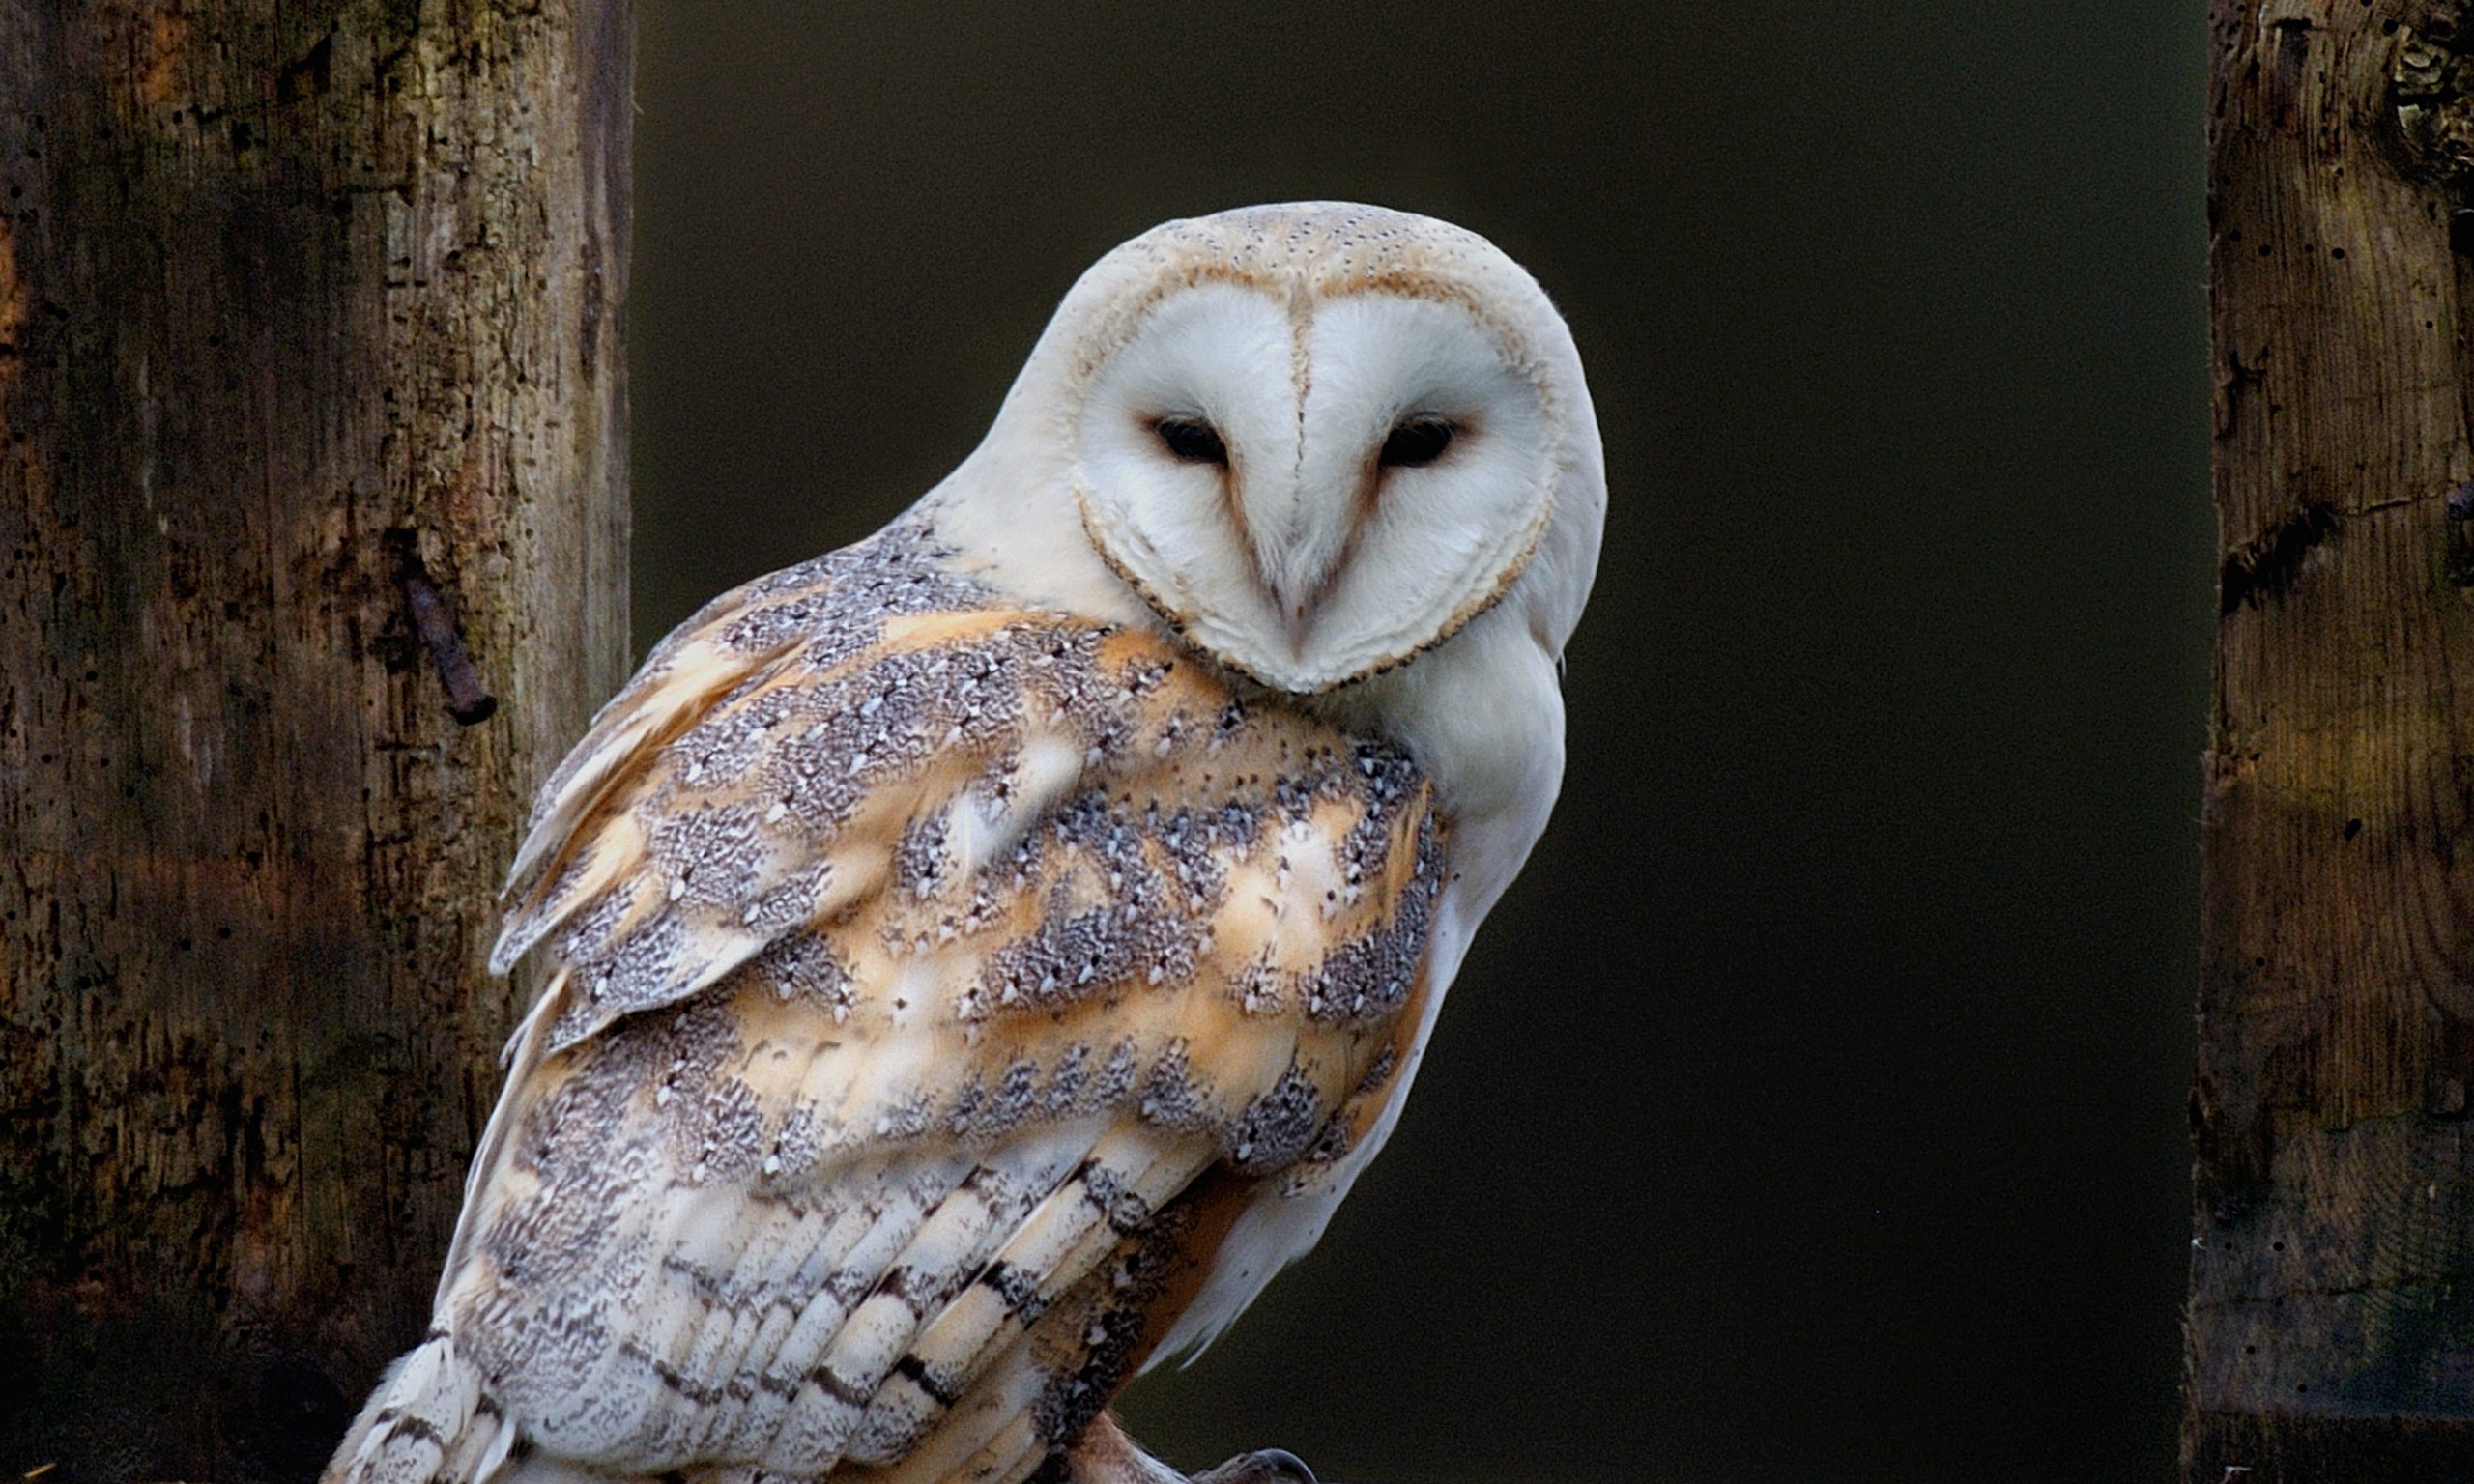 On Rat Poisons Urged To Protect Barn Owls Environment The Guardian